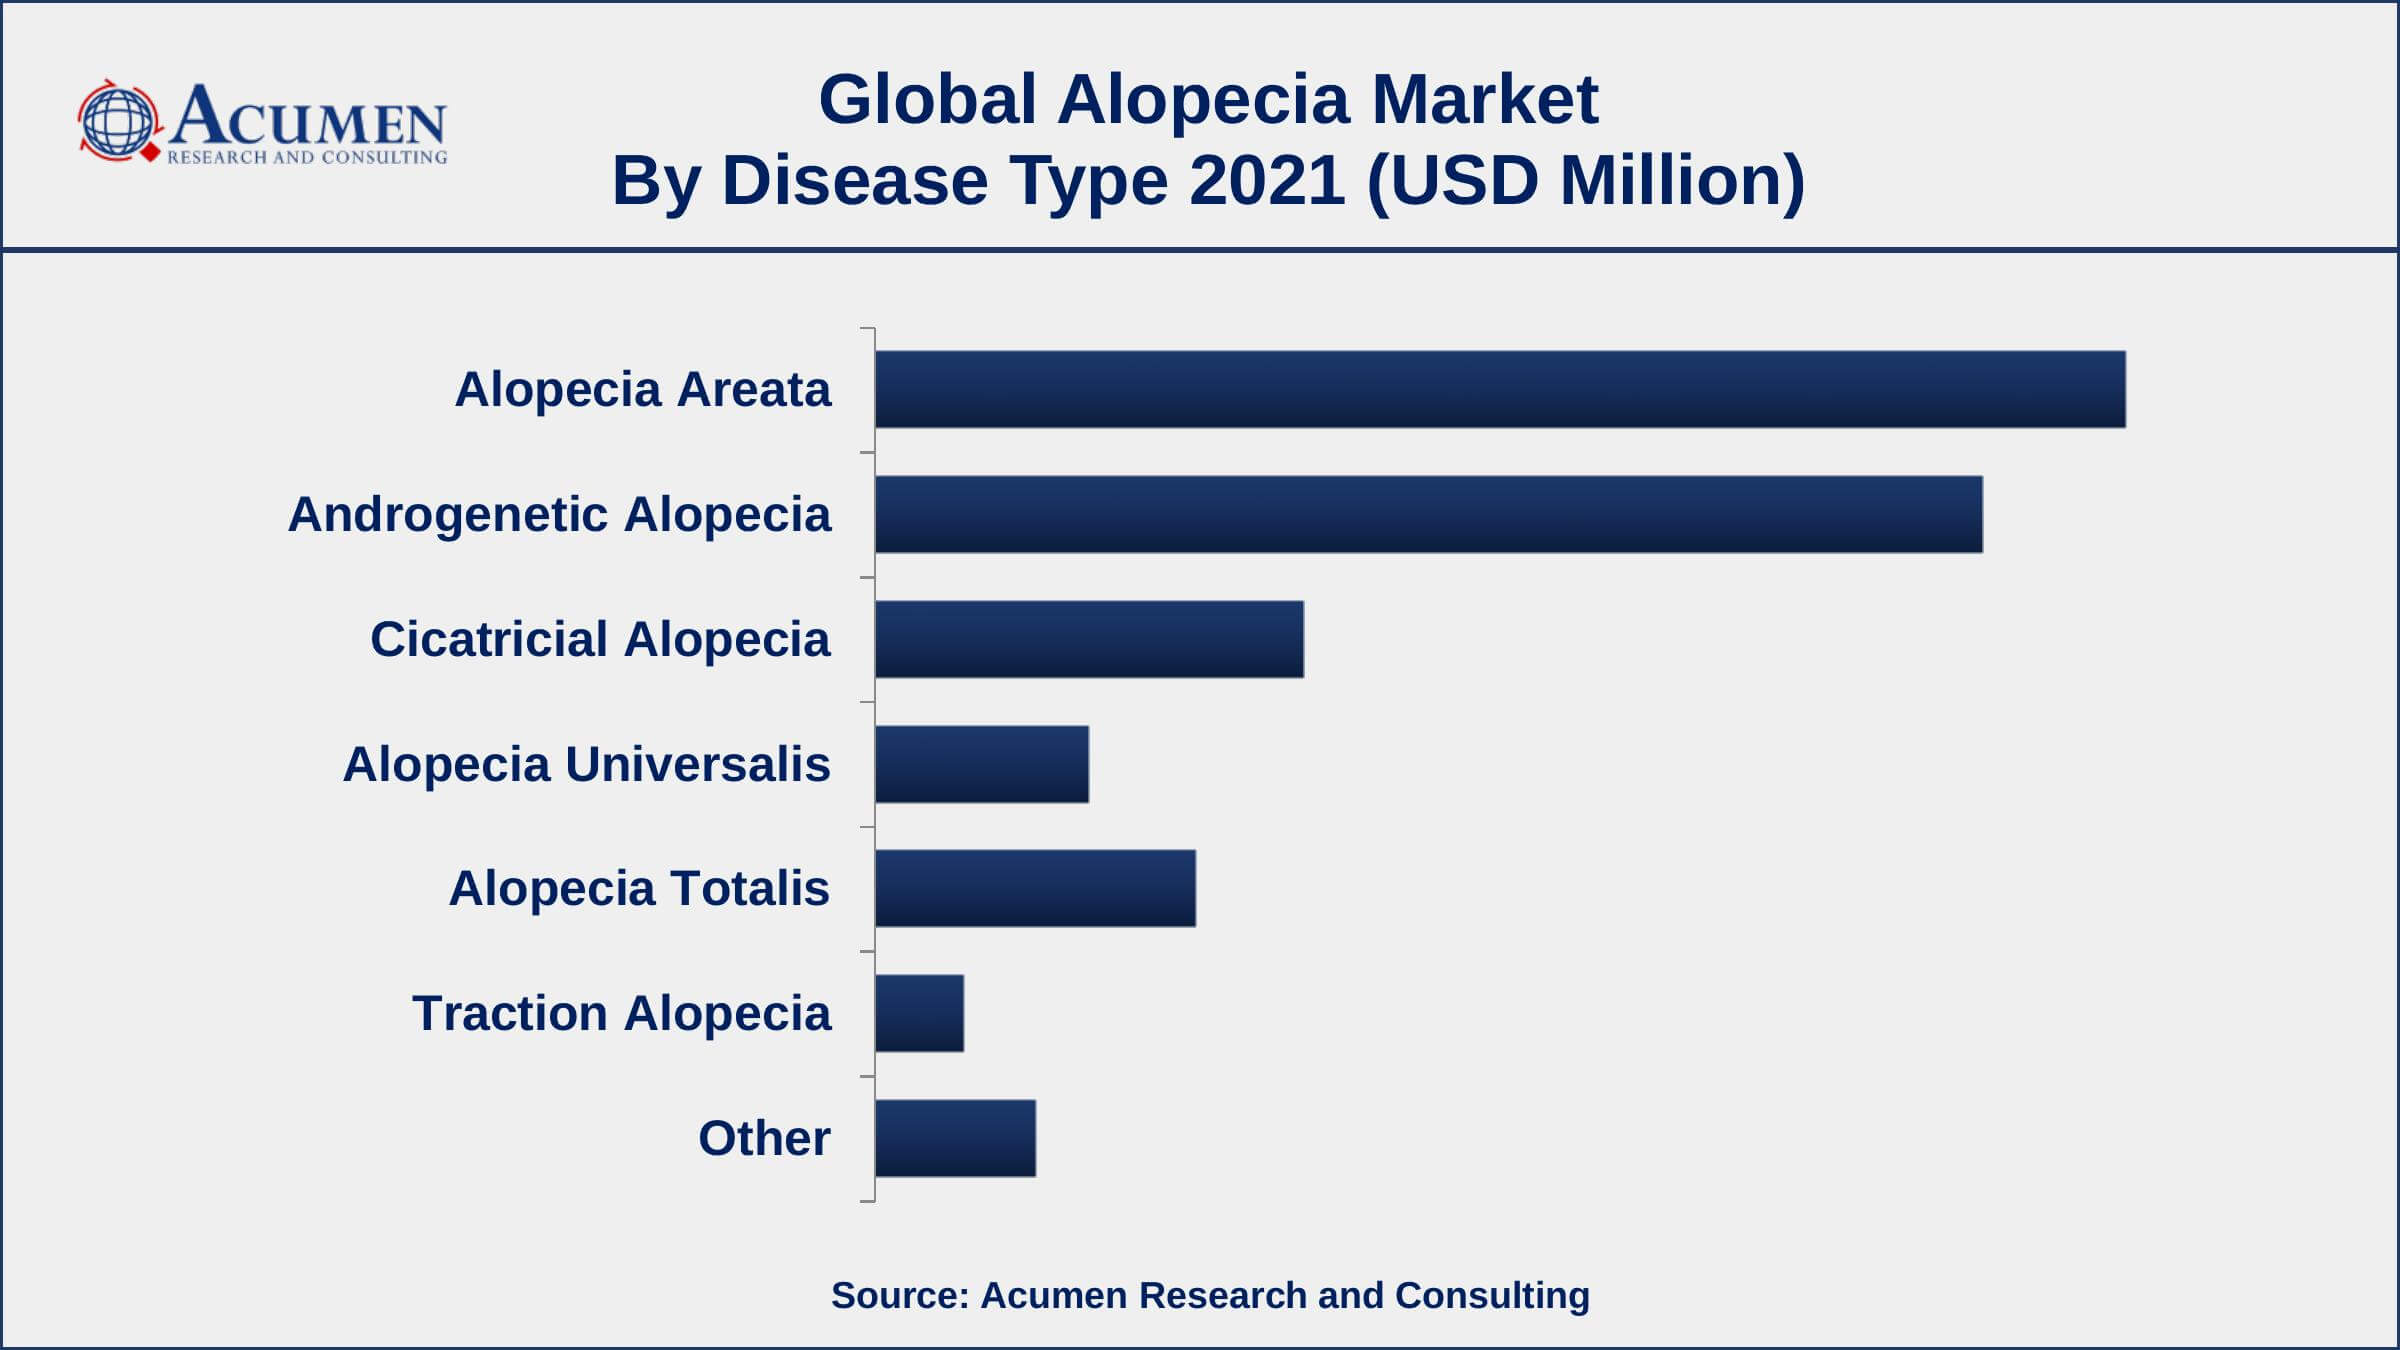 By disease type, the alopecia areata segment has accounted market share of over 35% in 2021